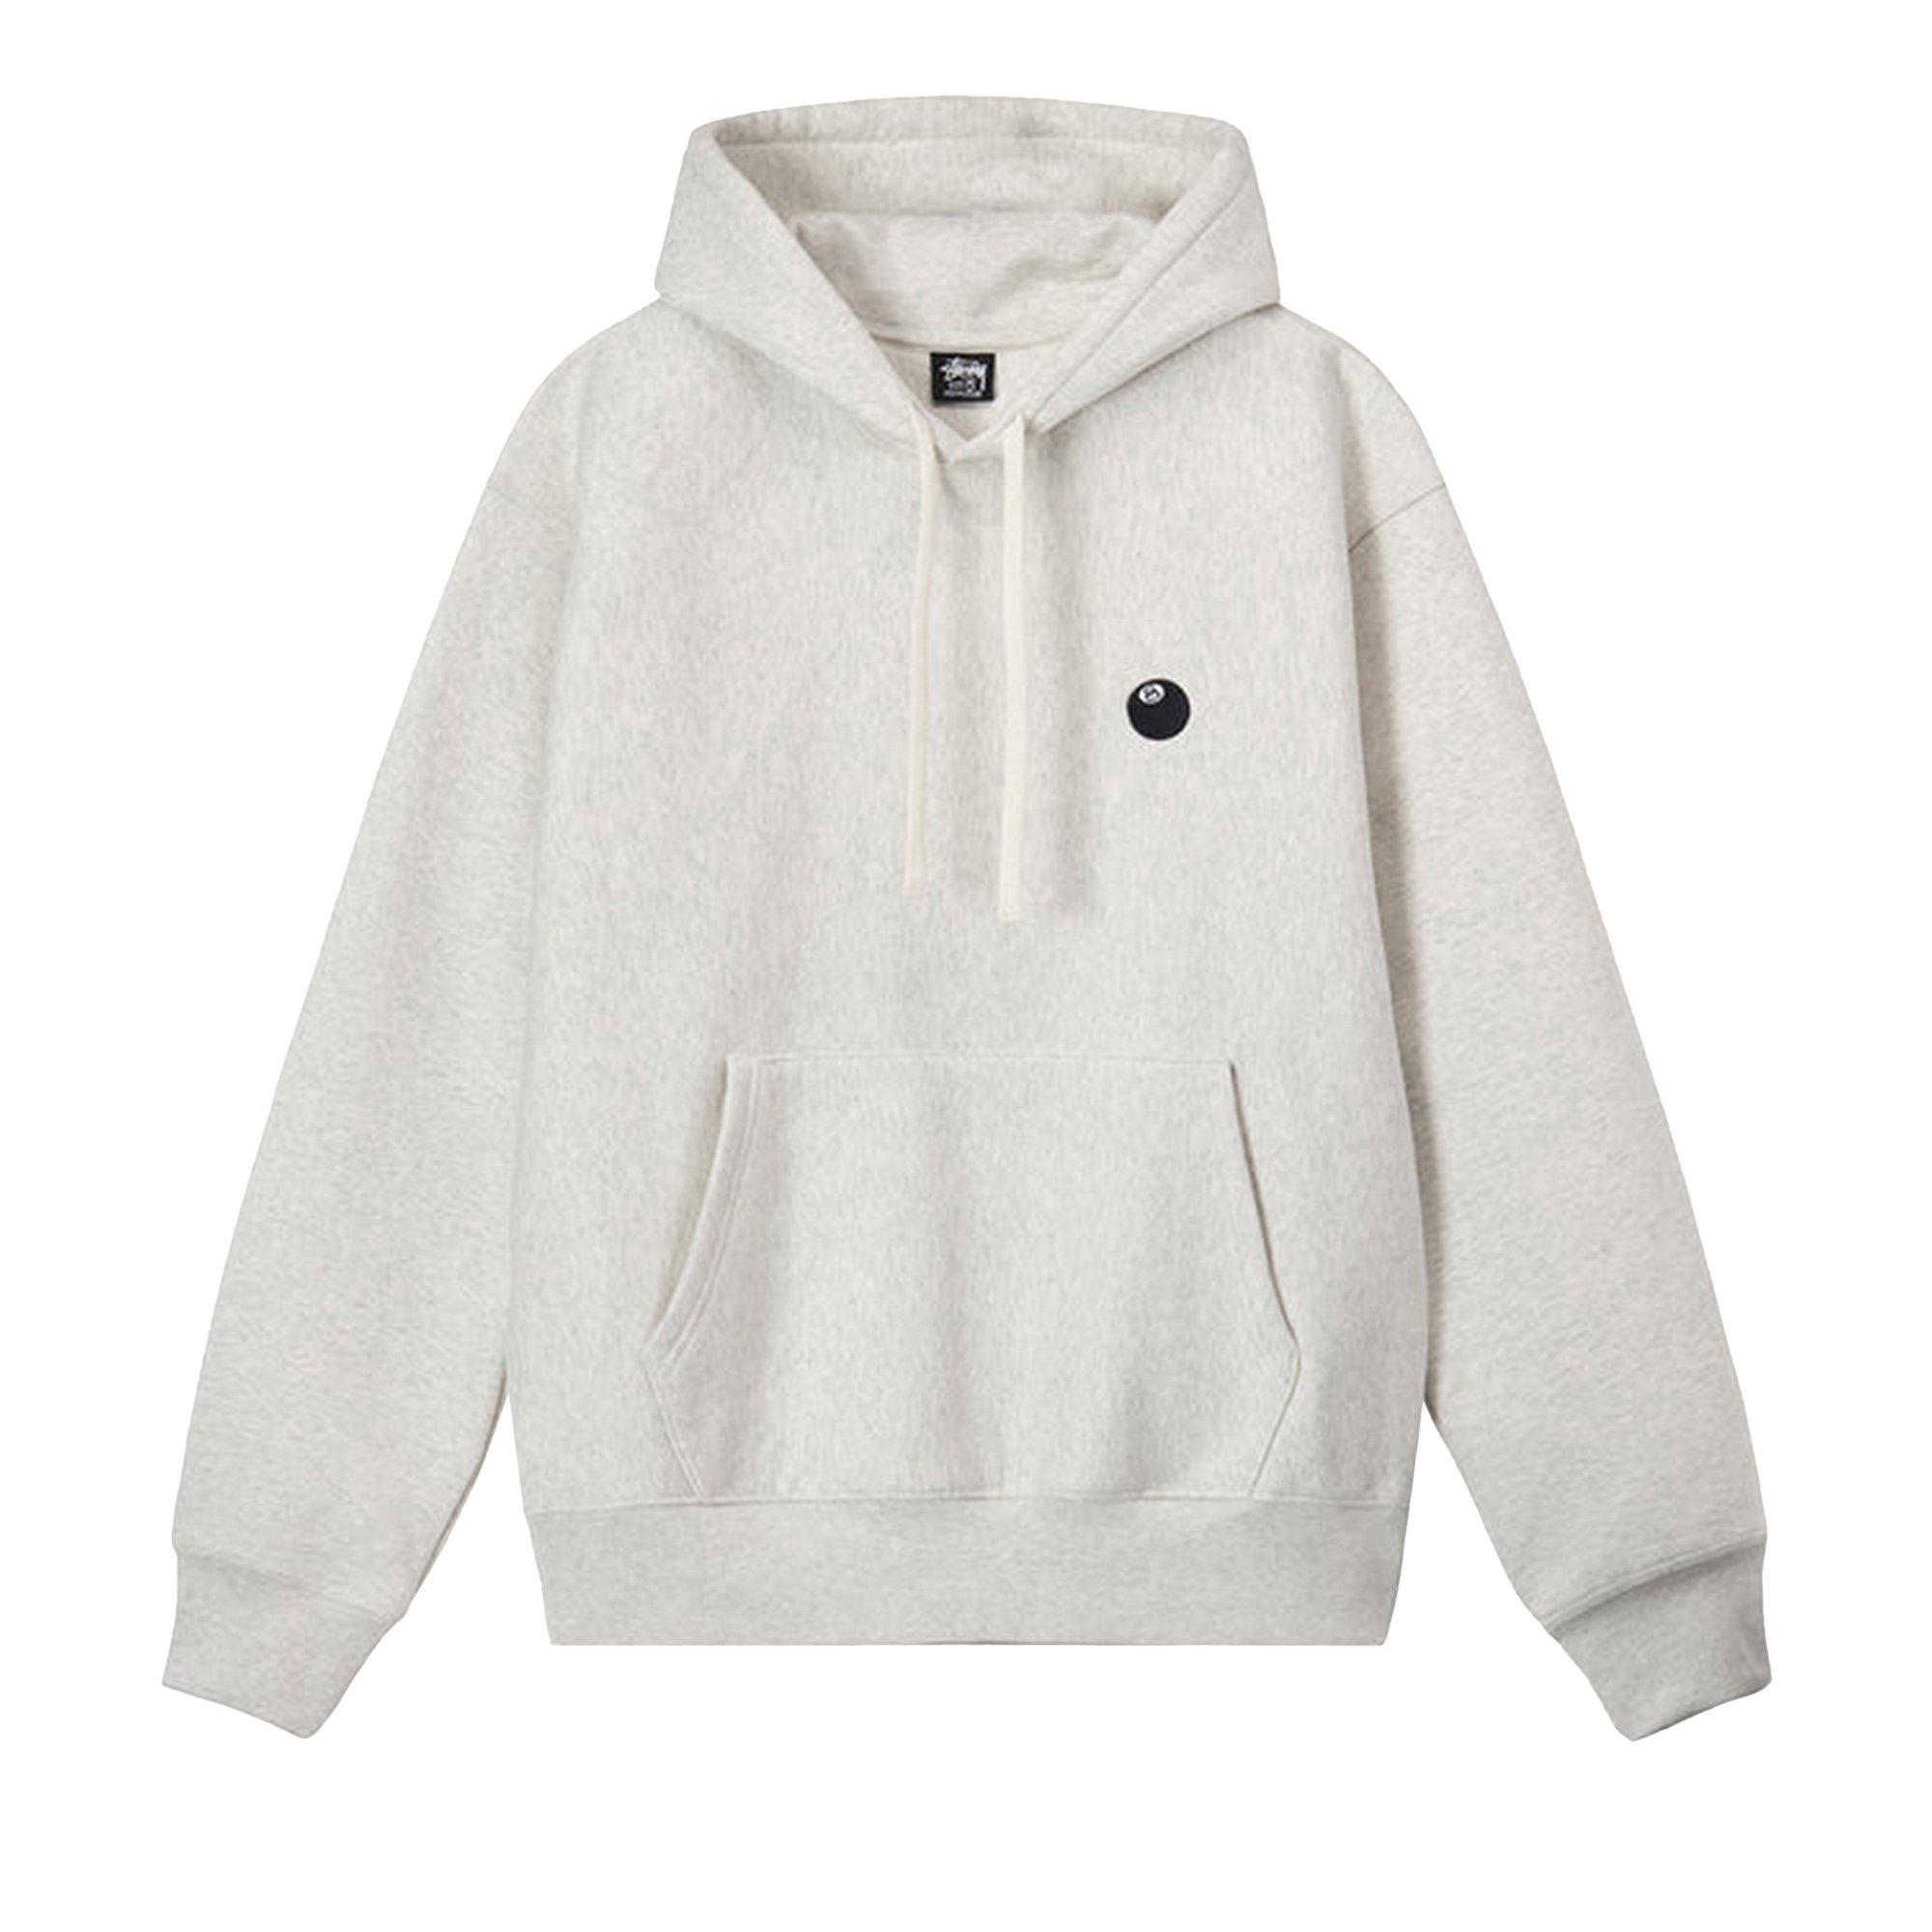 Buy Stussy 8 Ball Embroidered Hoodie 'Ash Heather' - 118479 ASH | GOAT